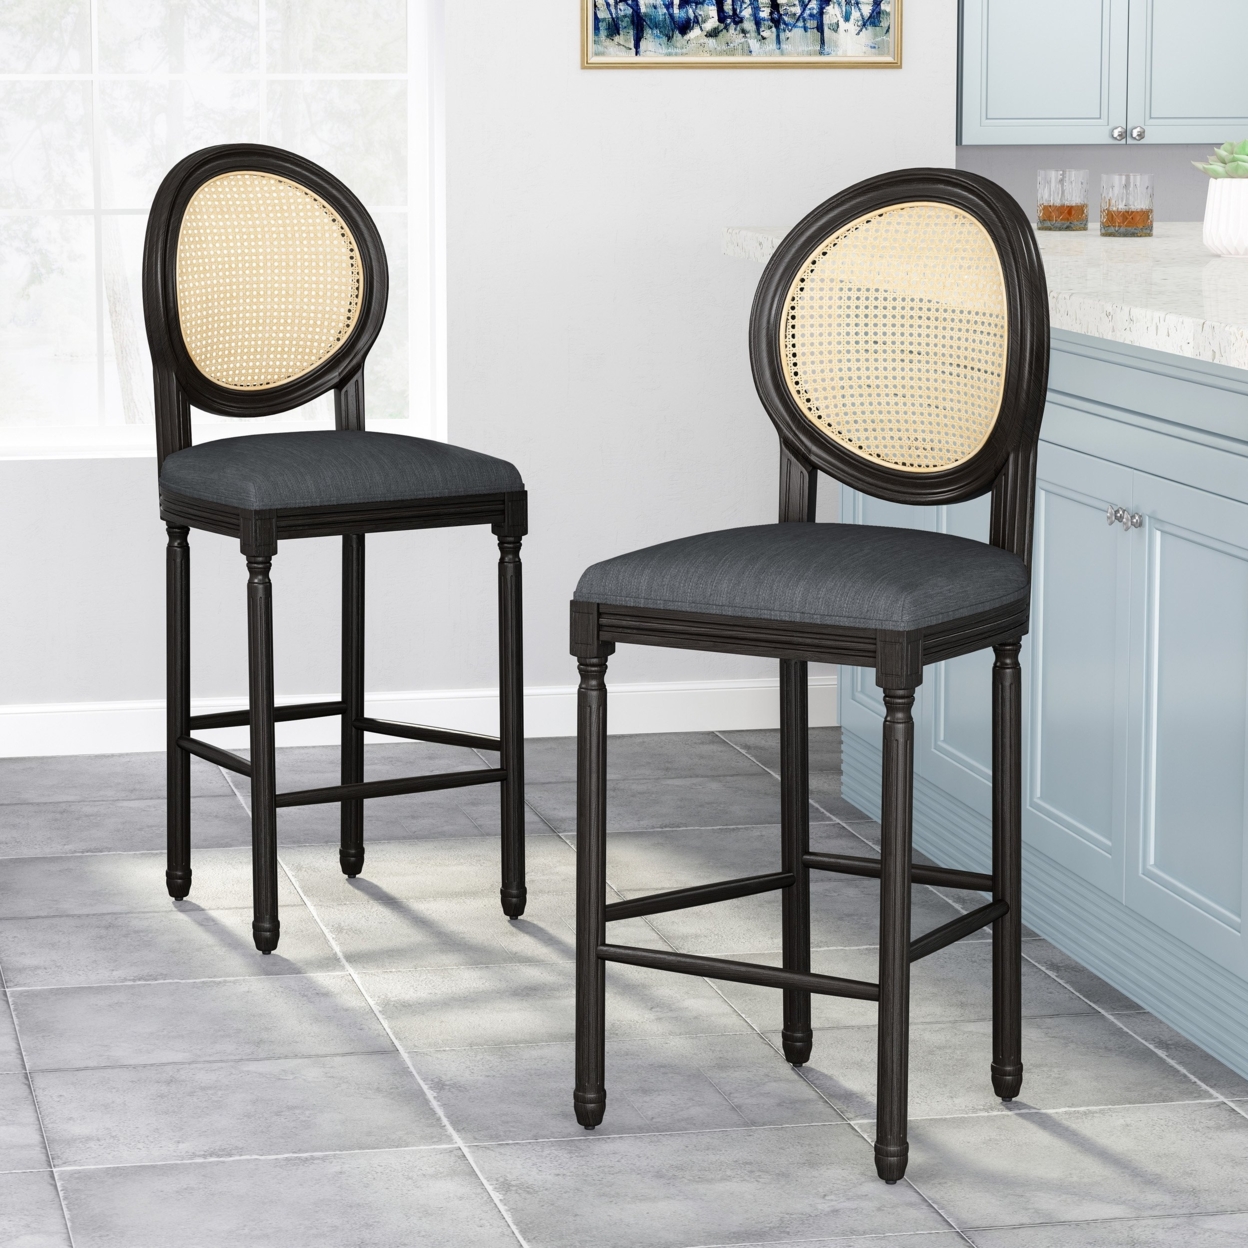 Towner French Country Wooden Barstools With Upholstered Seating (Set Of 2) - Black/charcoal/natural